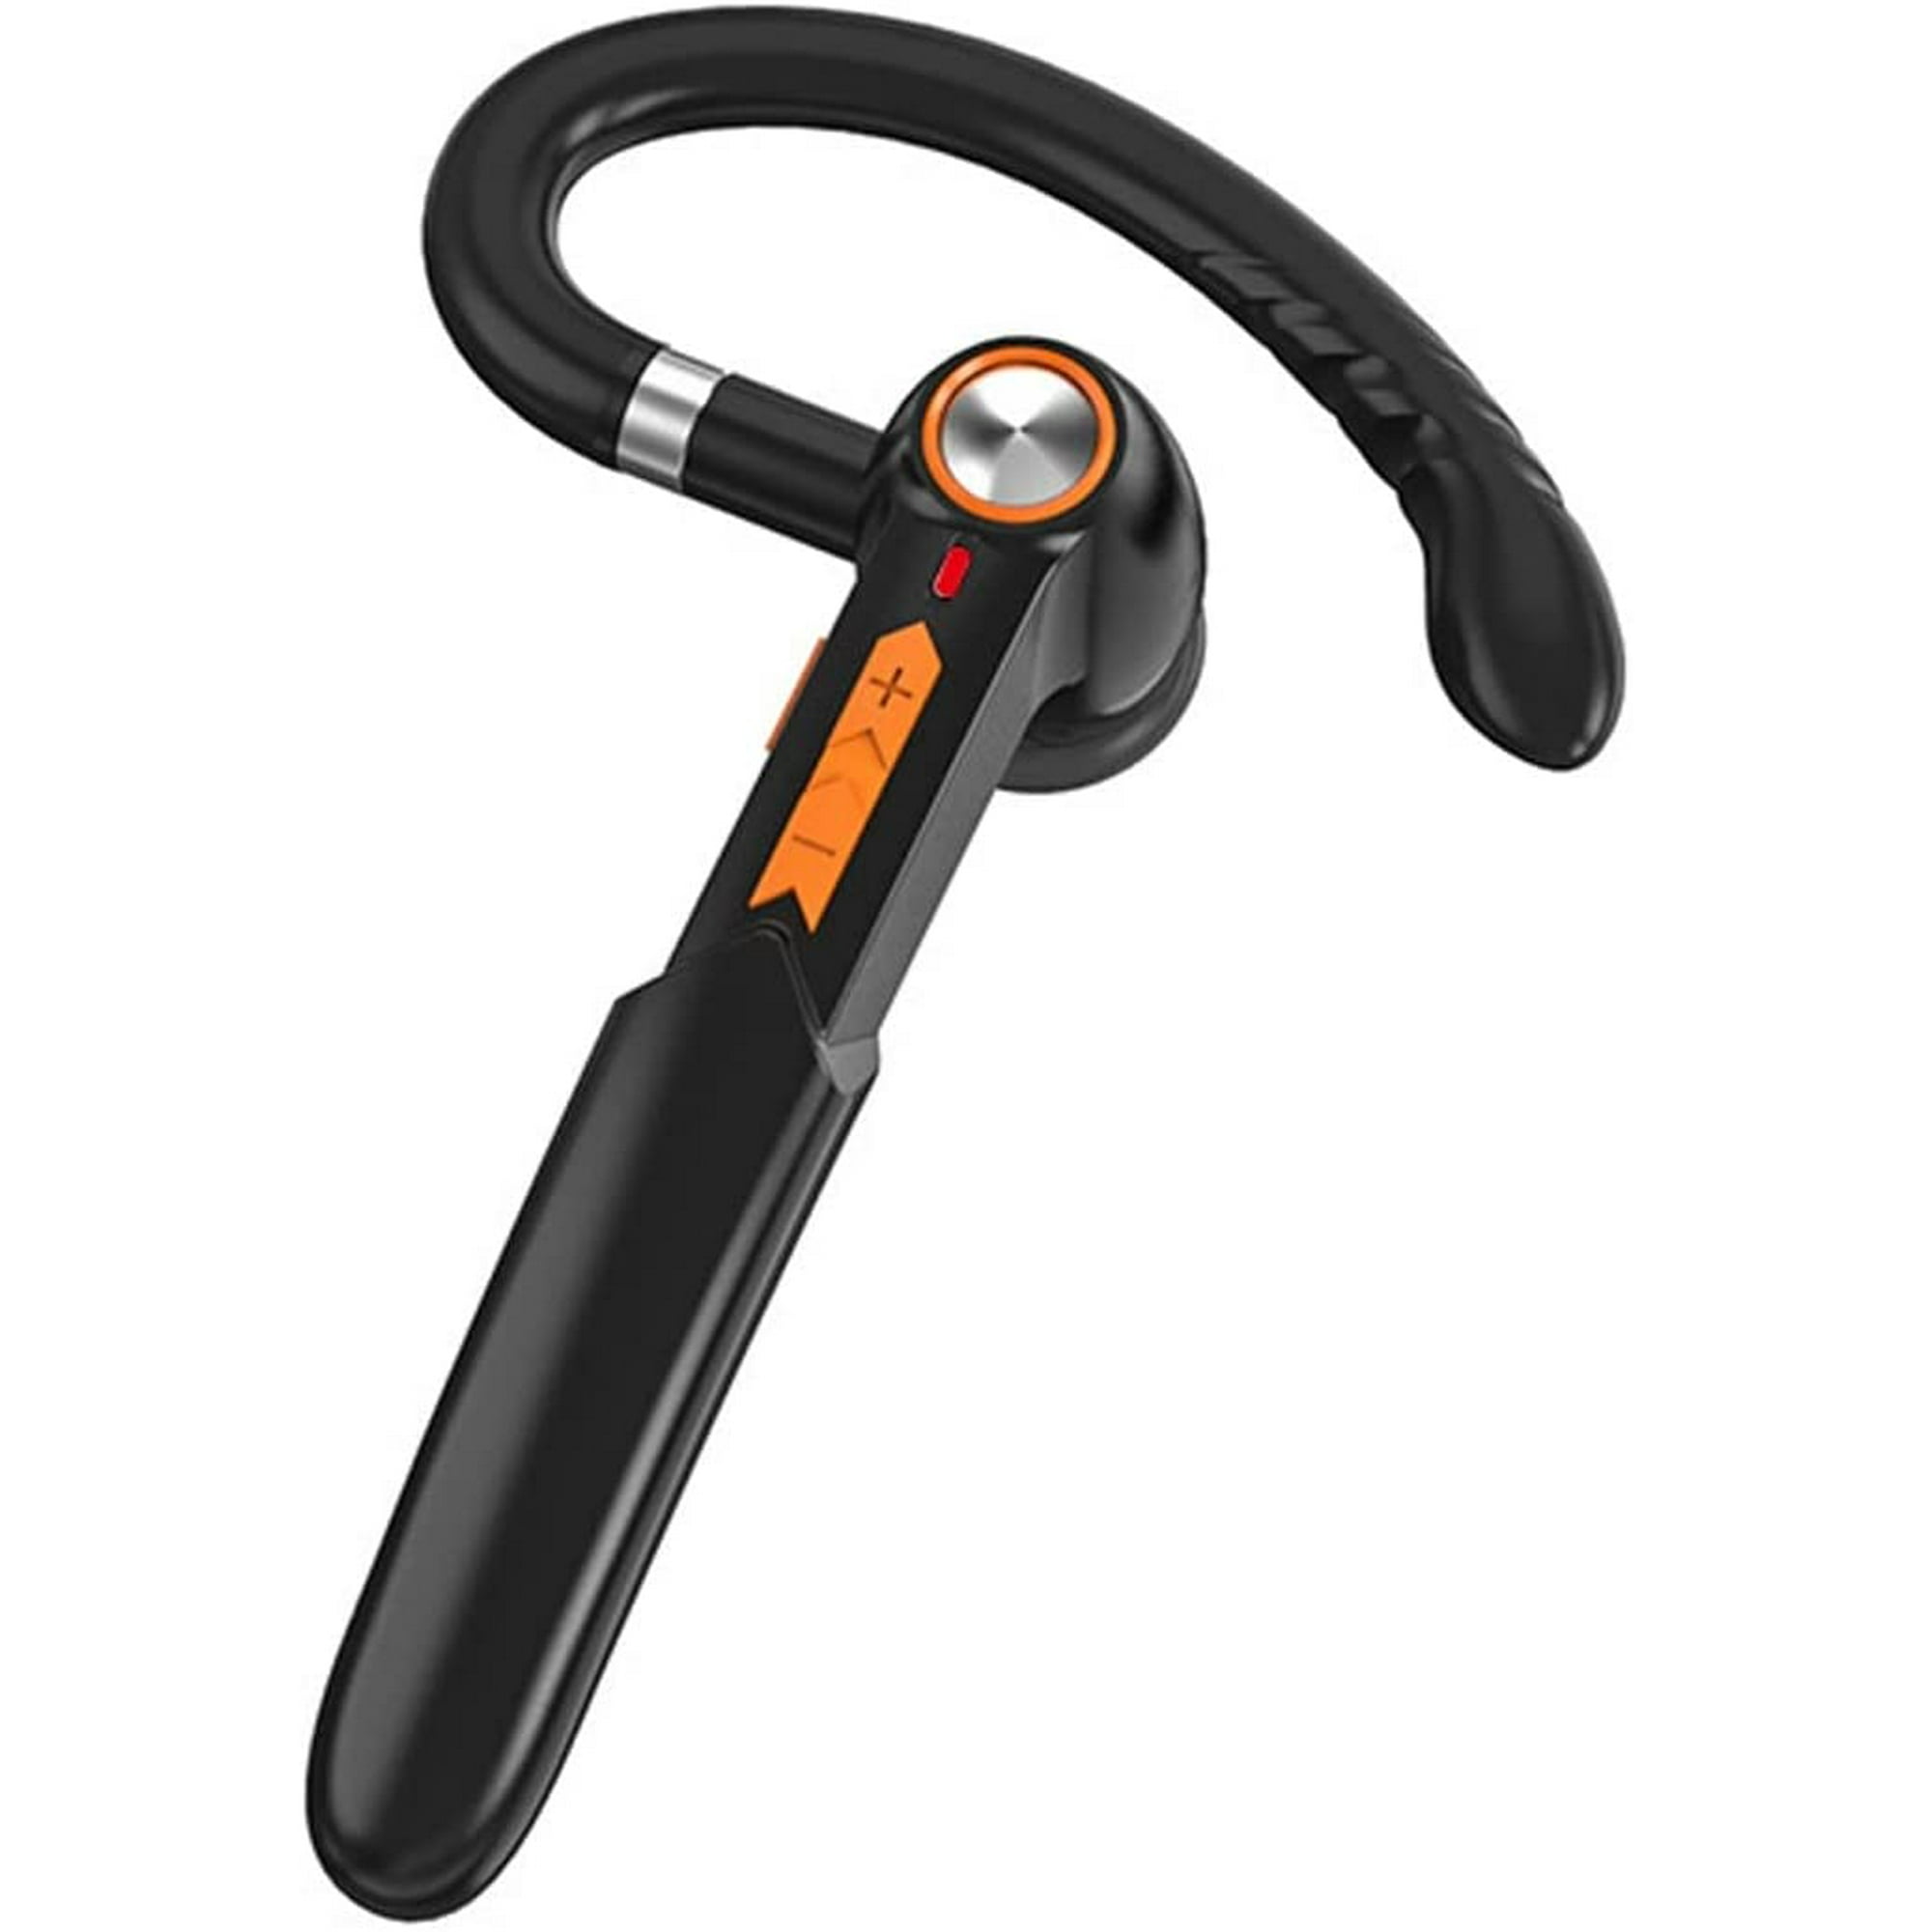 Bluetooth Headset 5.0 with CVC8.0 Dual Mic Noise Cancelling